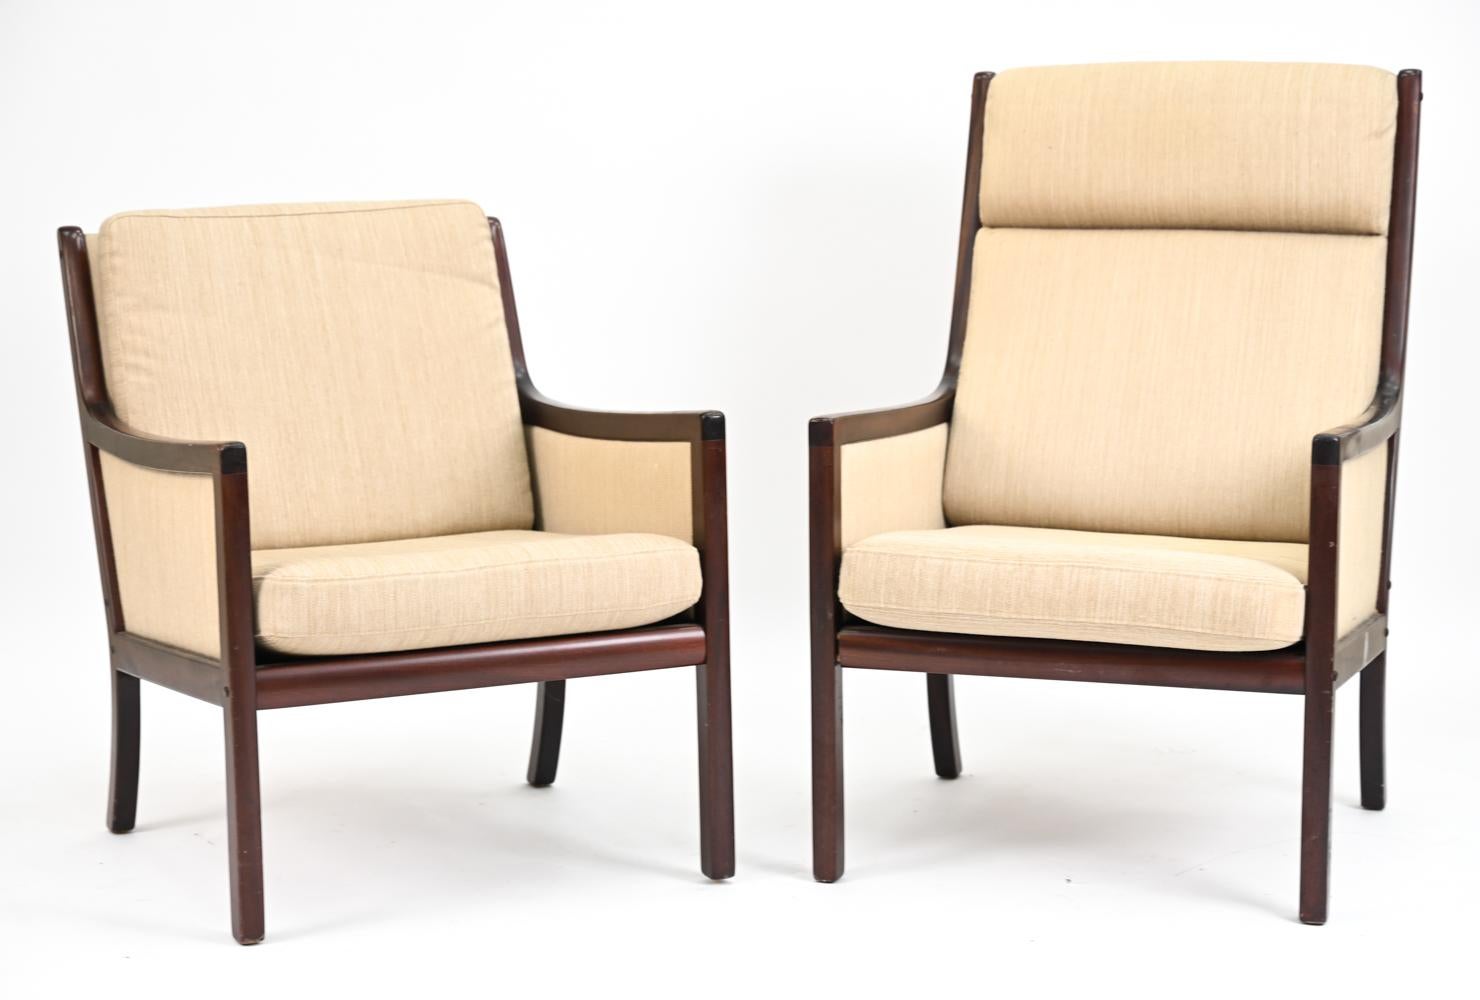 A handsome pair of Danish mid-century lounge chairs of a more traditional air, designed by Ole Wanscher for Poul Jeppesen. With Poul Jeppesen and Danish Control decals underneath. With fine mahogany frames and neutral beige upholstery. Inspired by